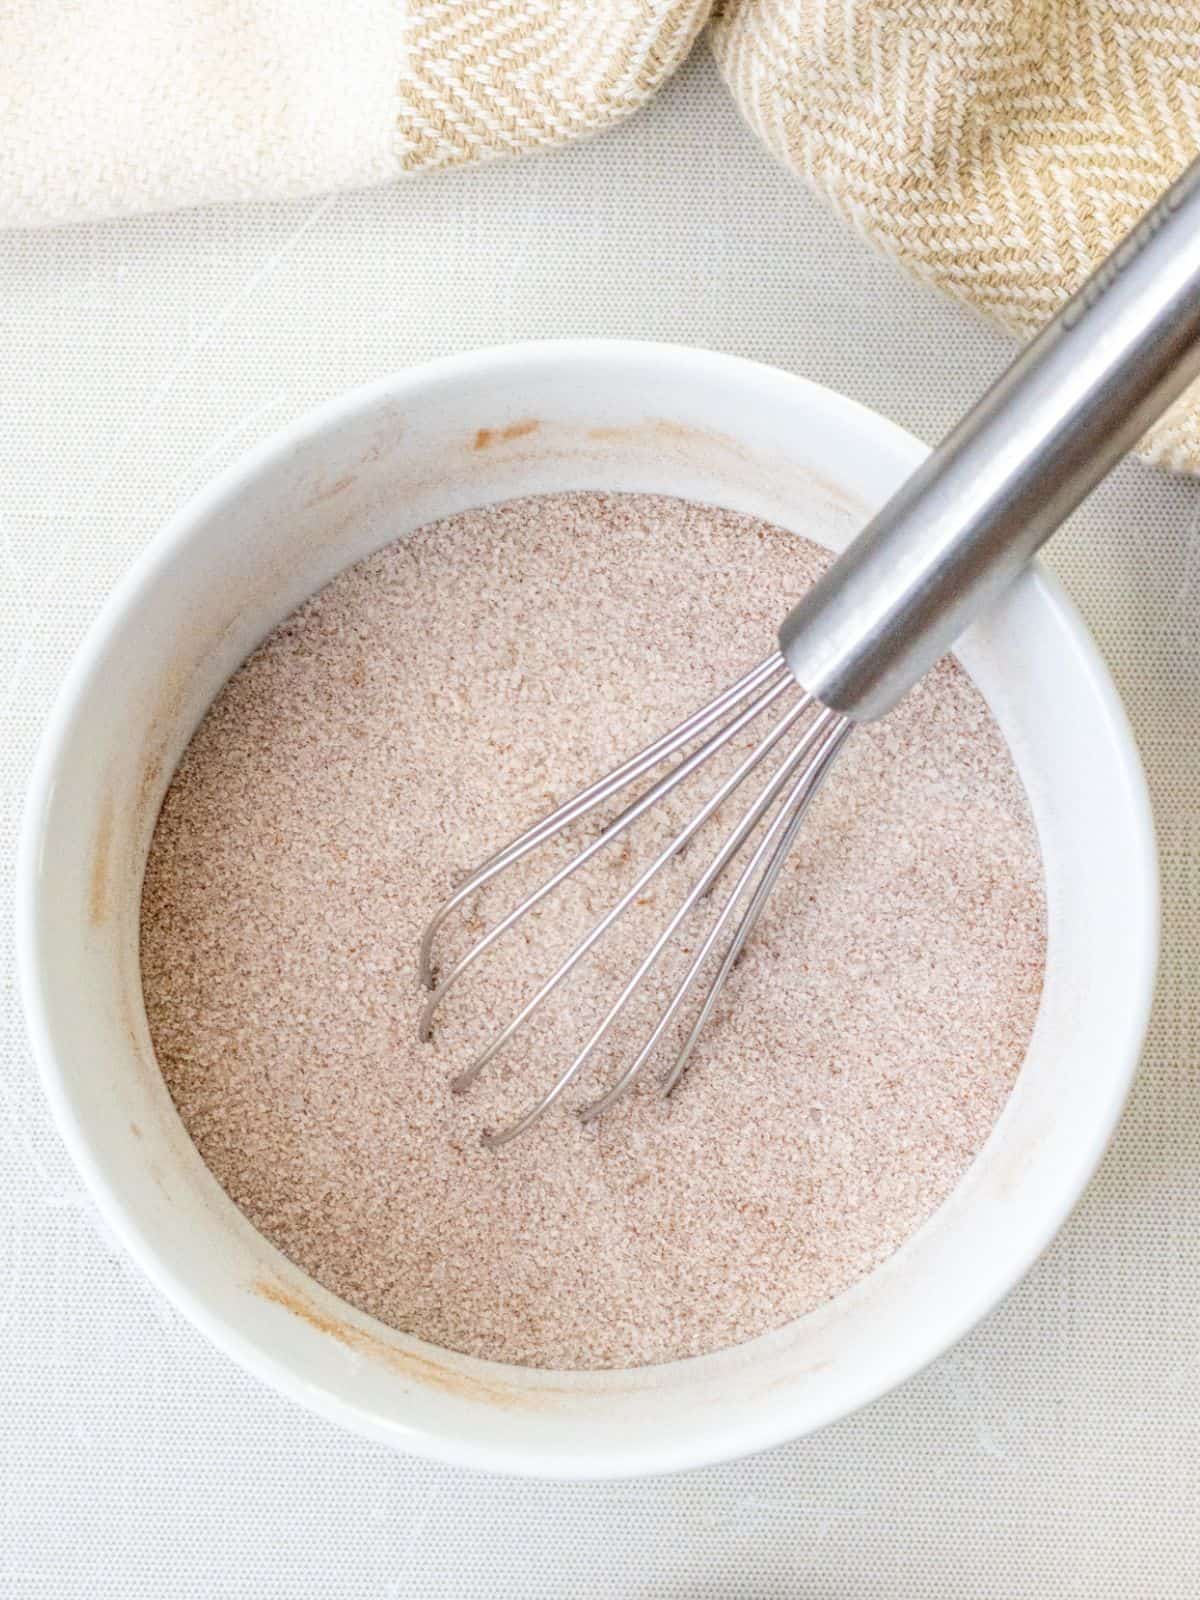 Cinnamon sugar mixture in a bowl with a whisk.